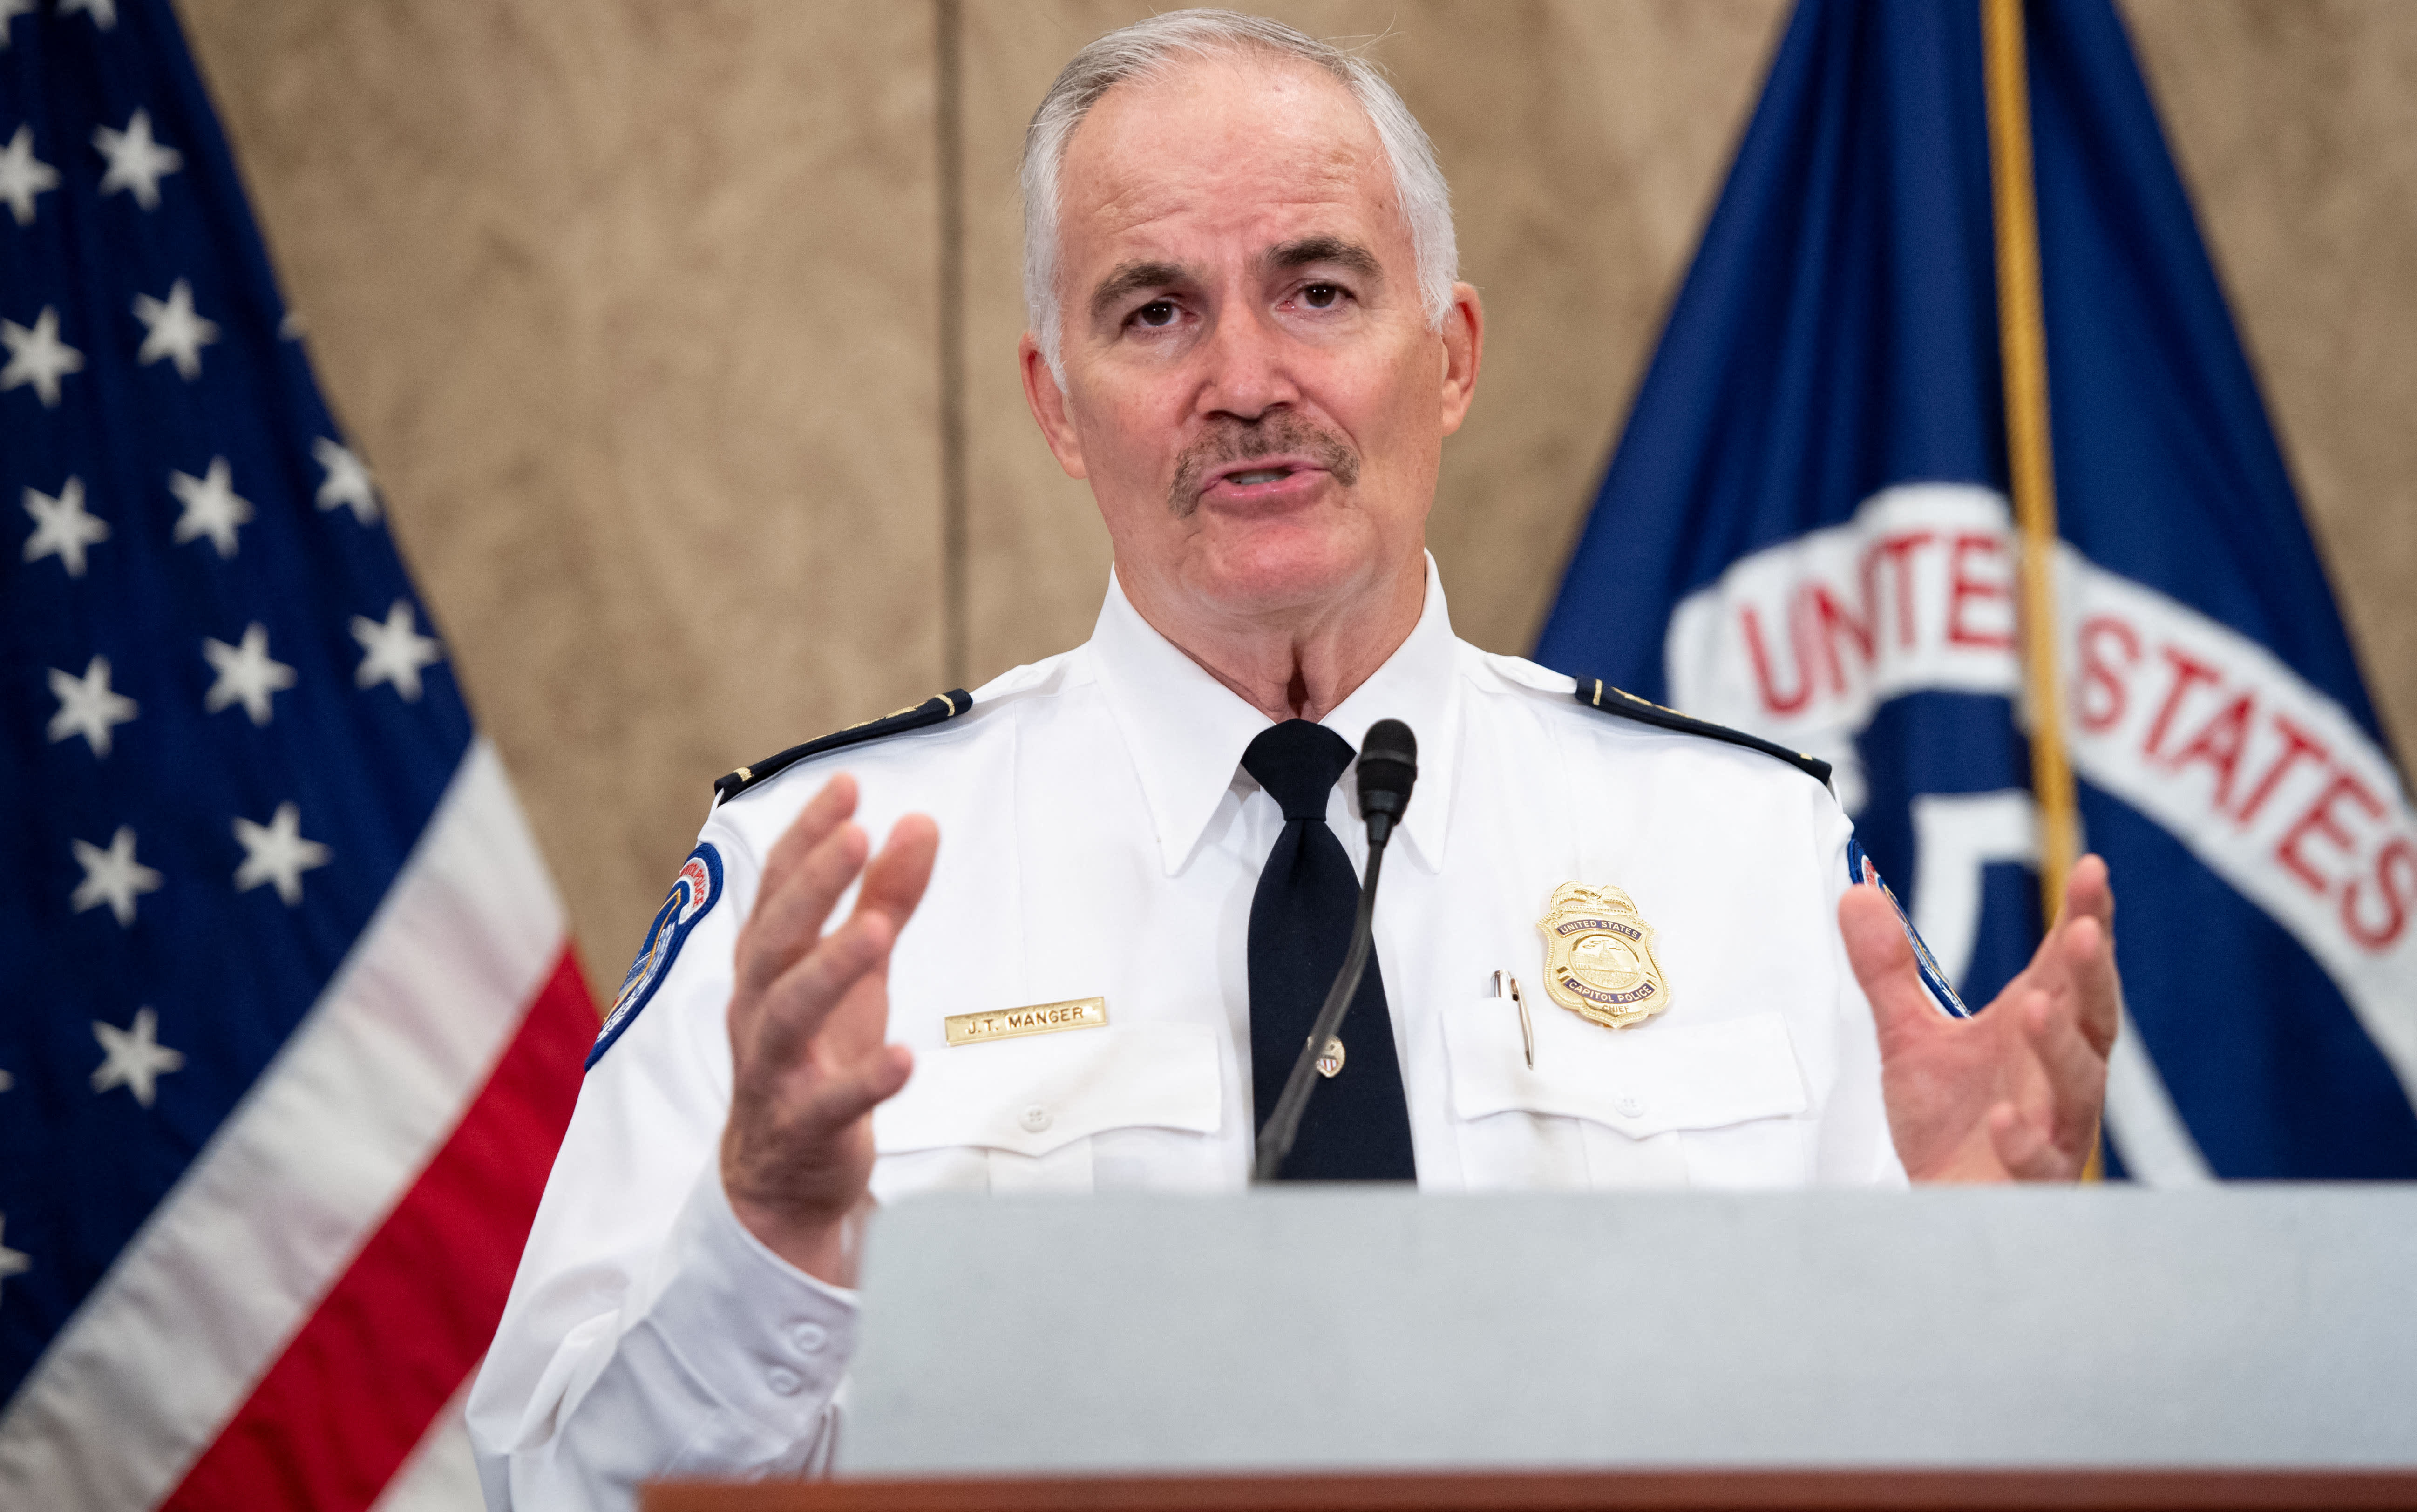 Capitol Police chief: ‘We’re not going to tolerate violence’